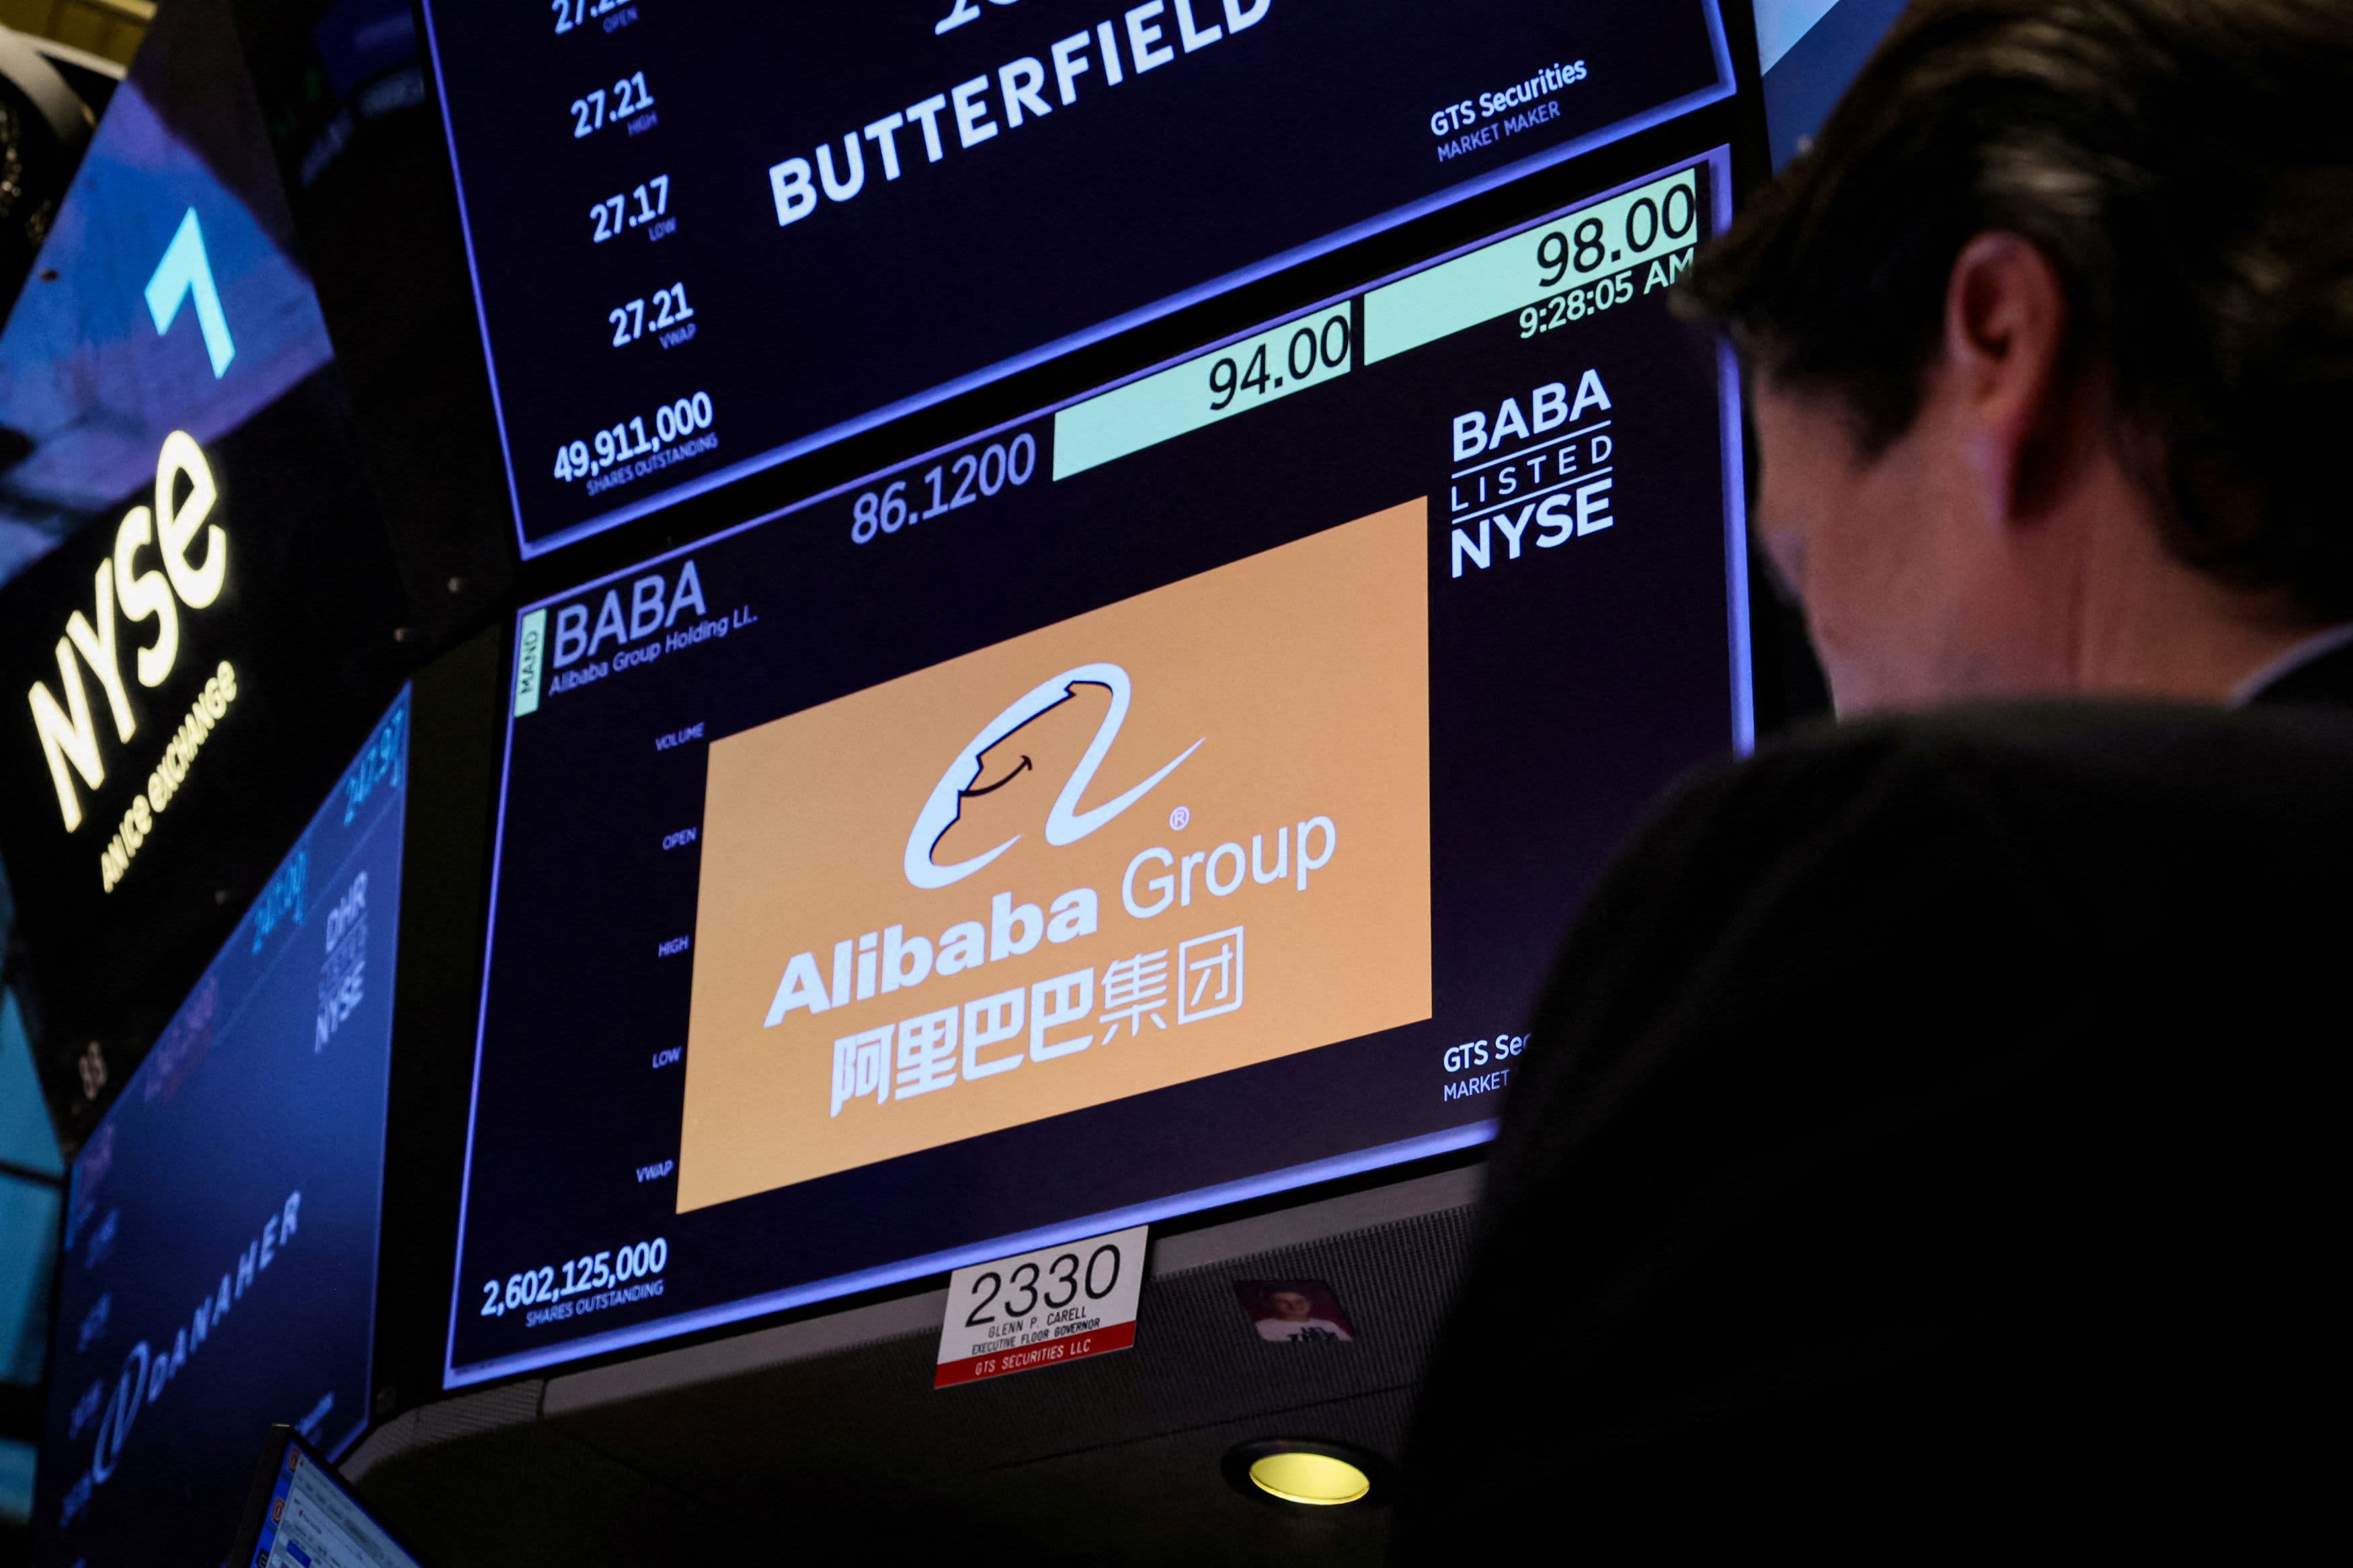 Alibaba shares soared Tuesday, but 'Fast Money' traders are wary of snapping up shares. Here's why